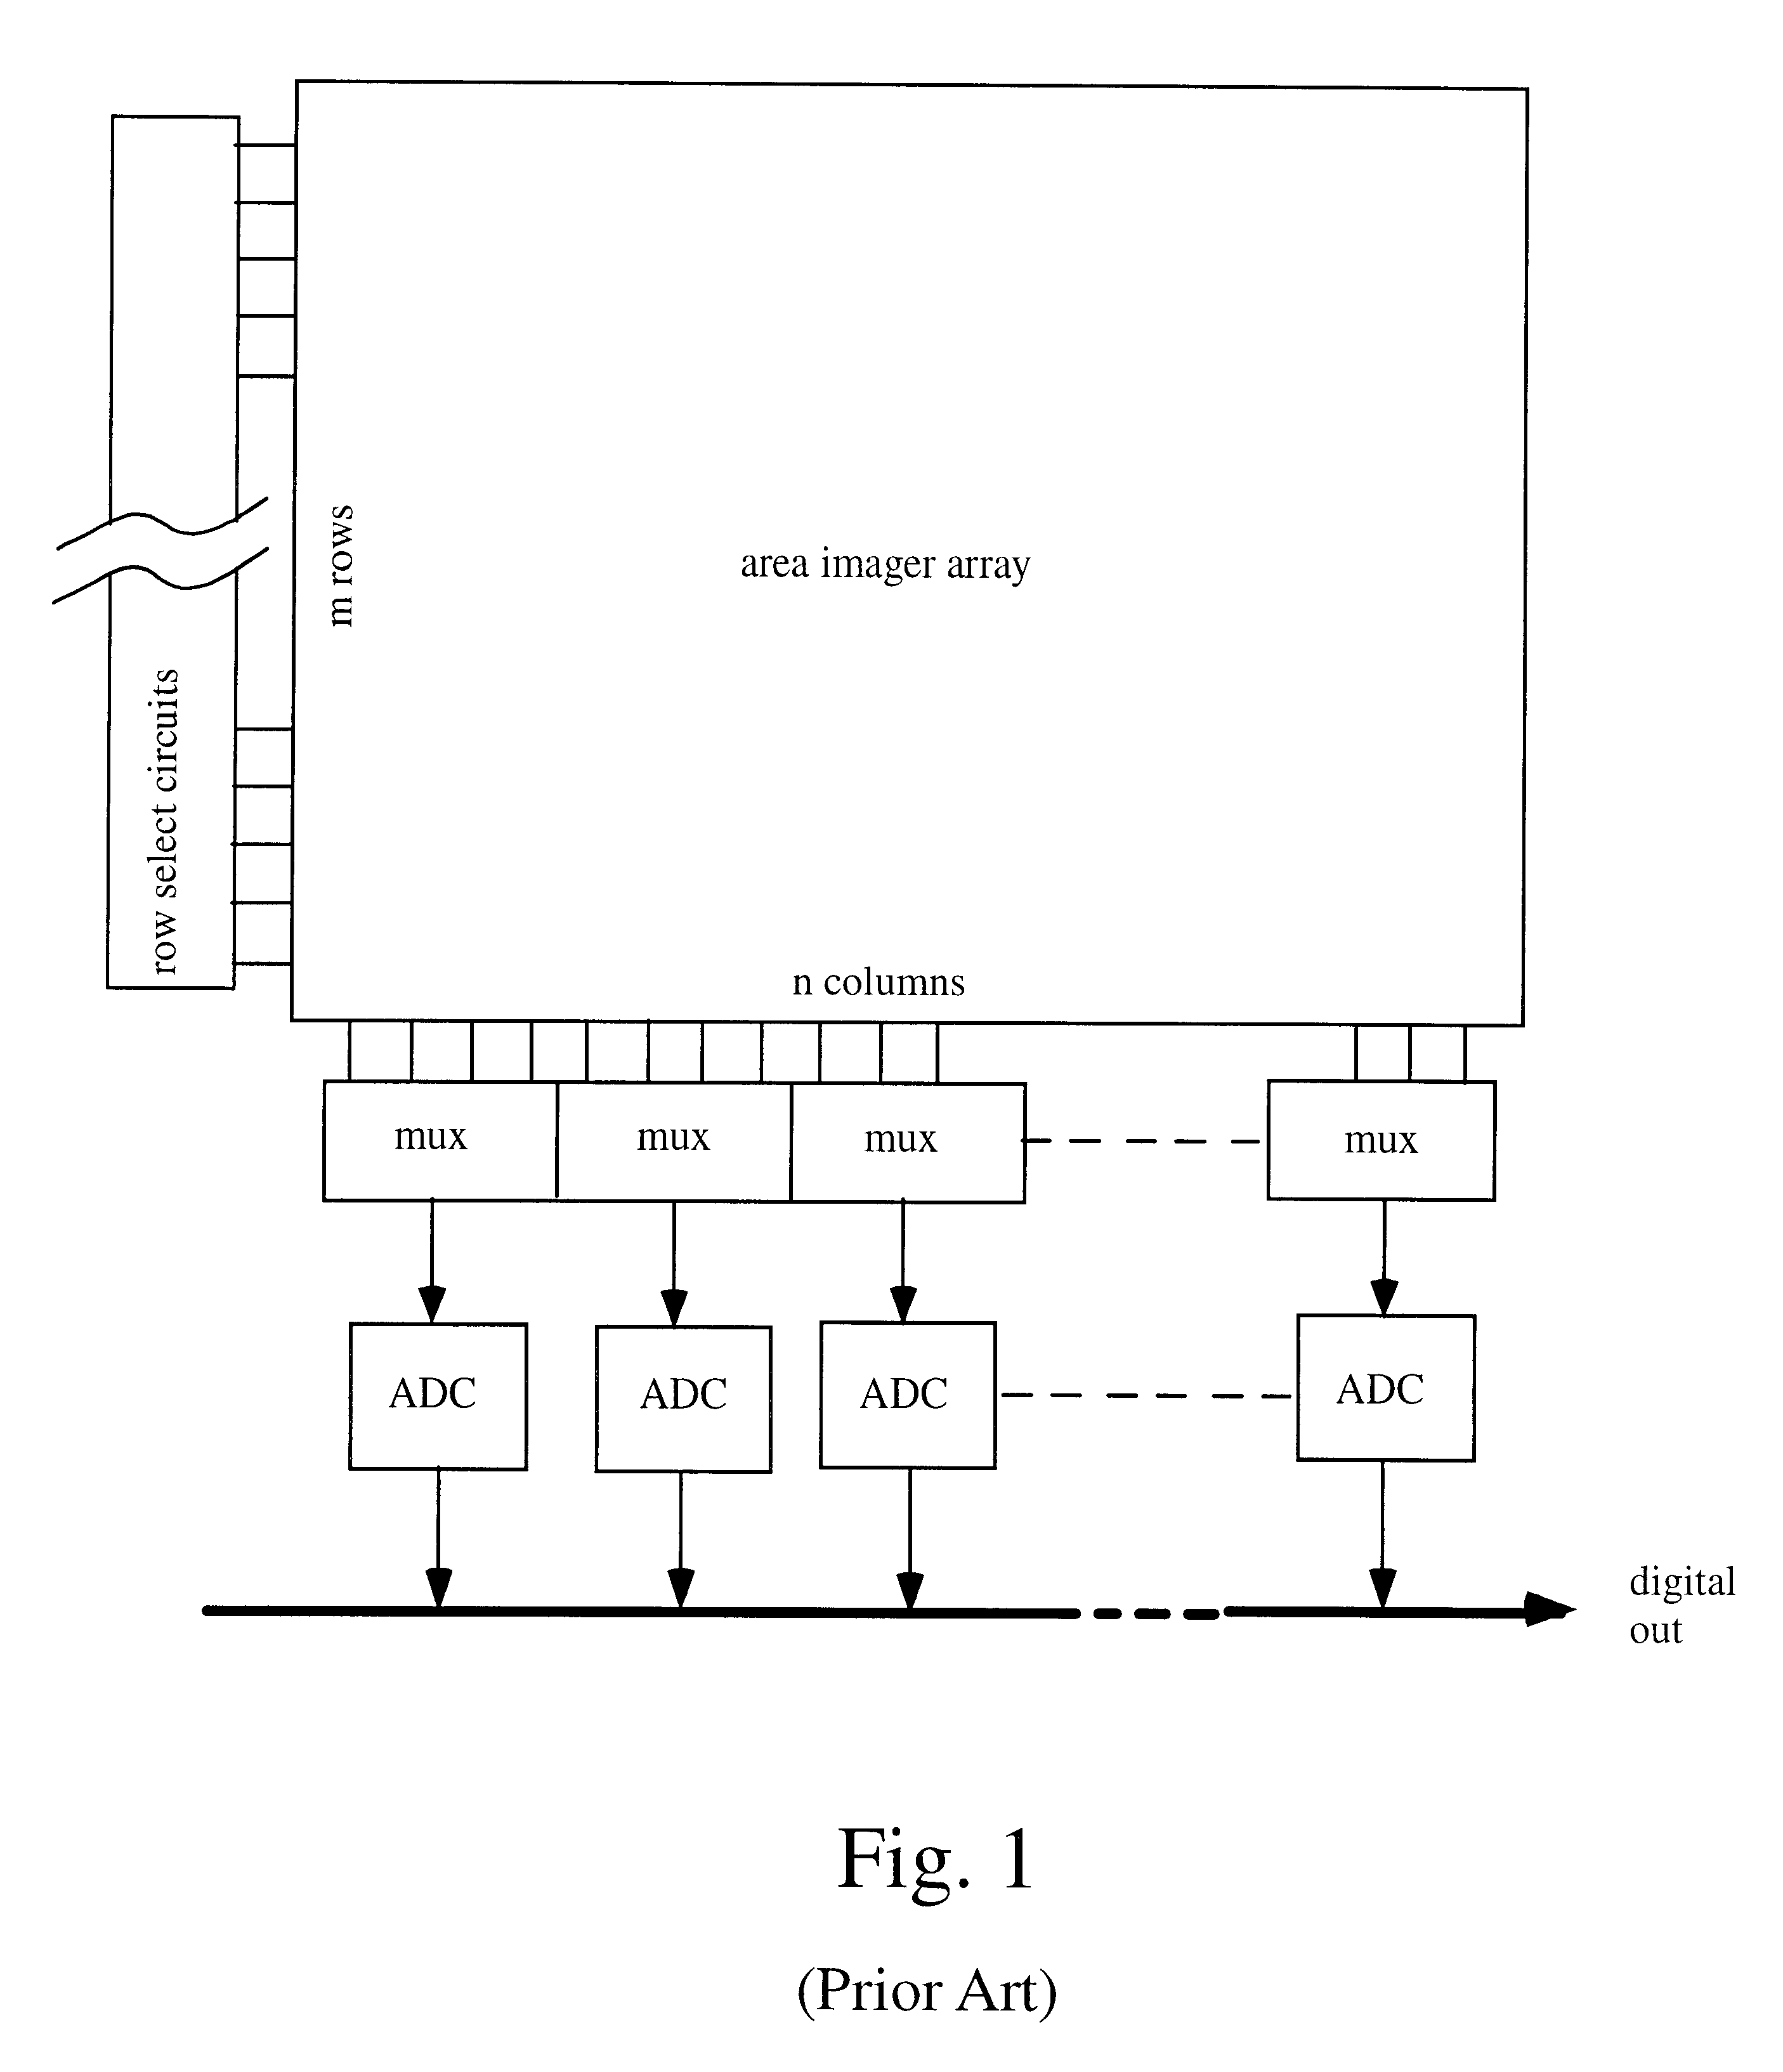 Intra-pixel frame storage element, array, and electronic shutter method suitable for electronic still camera applications